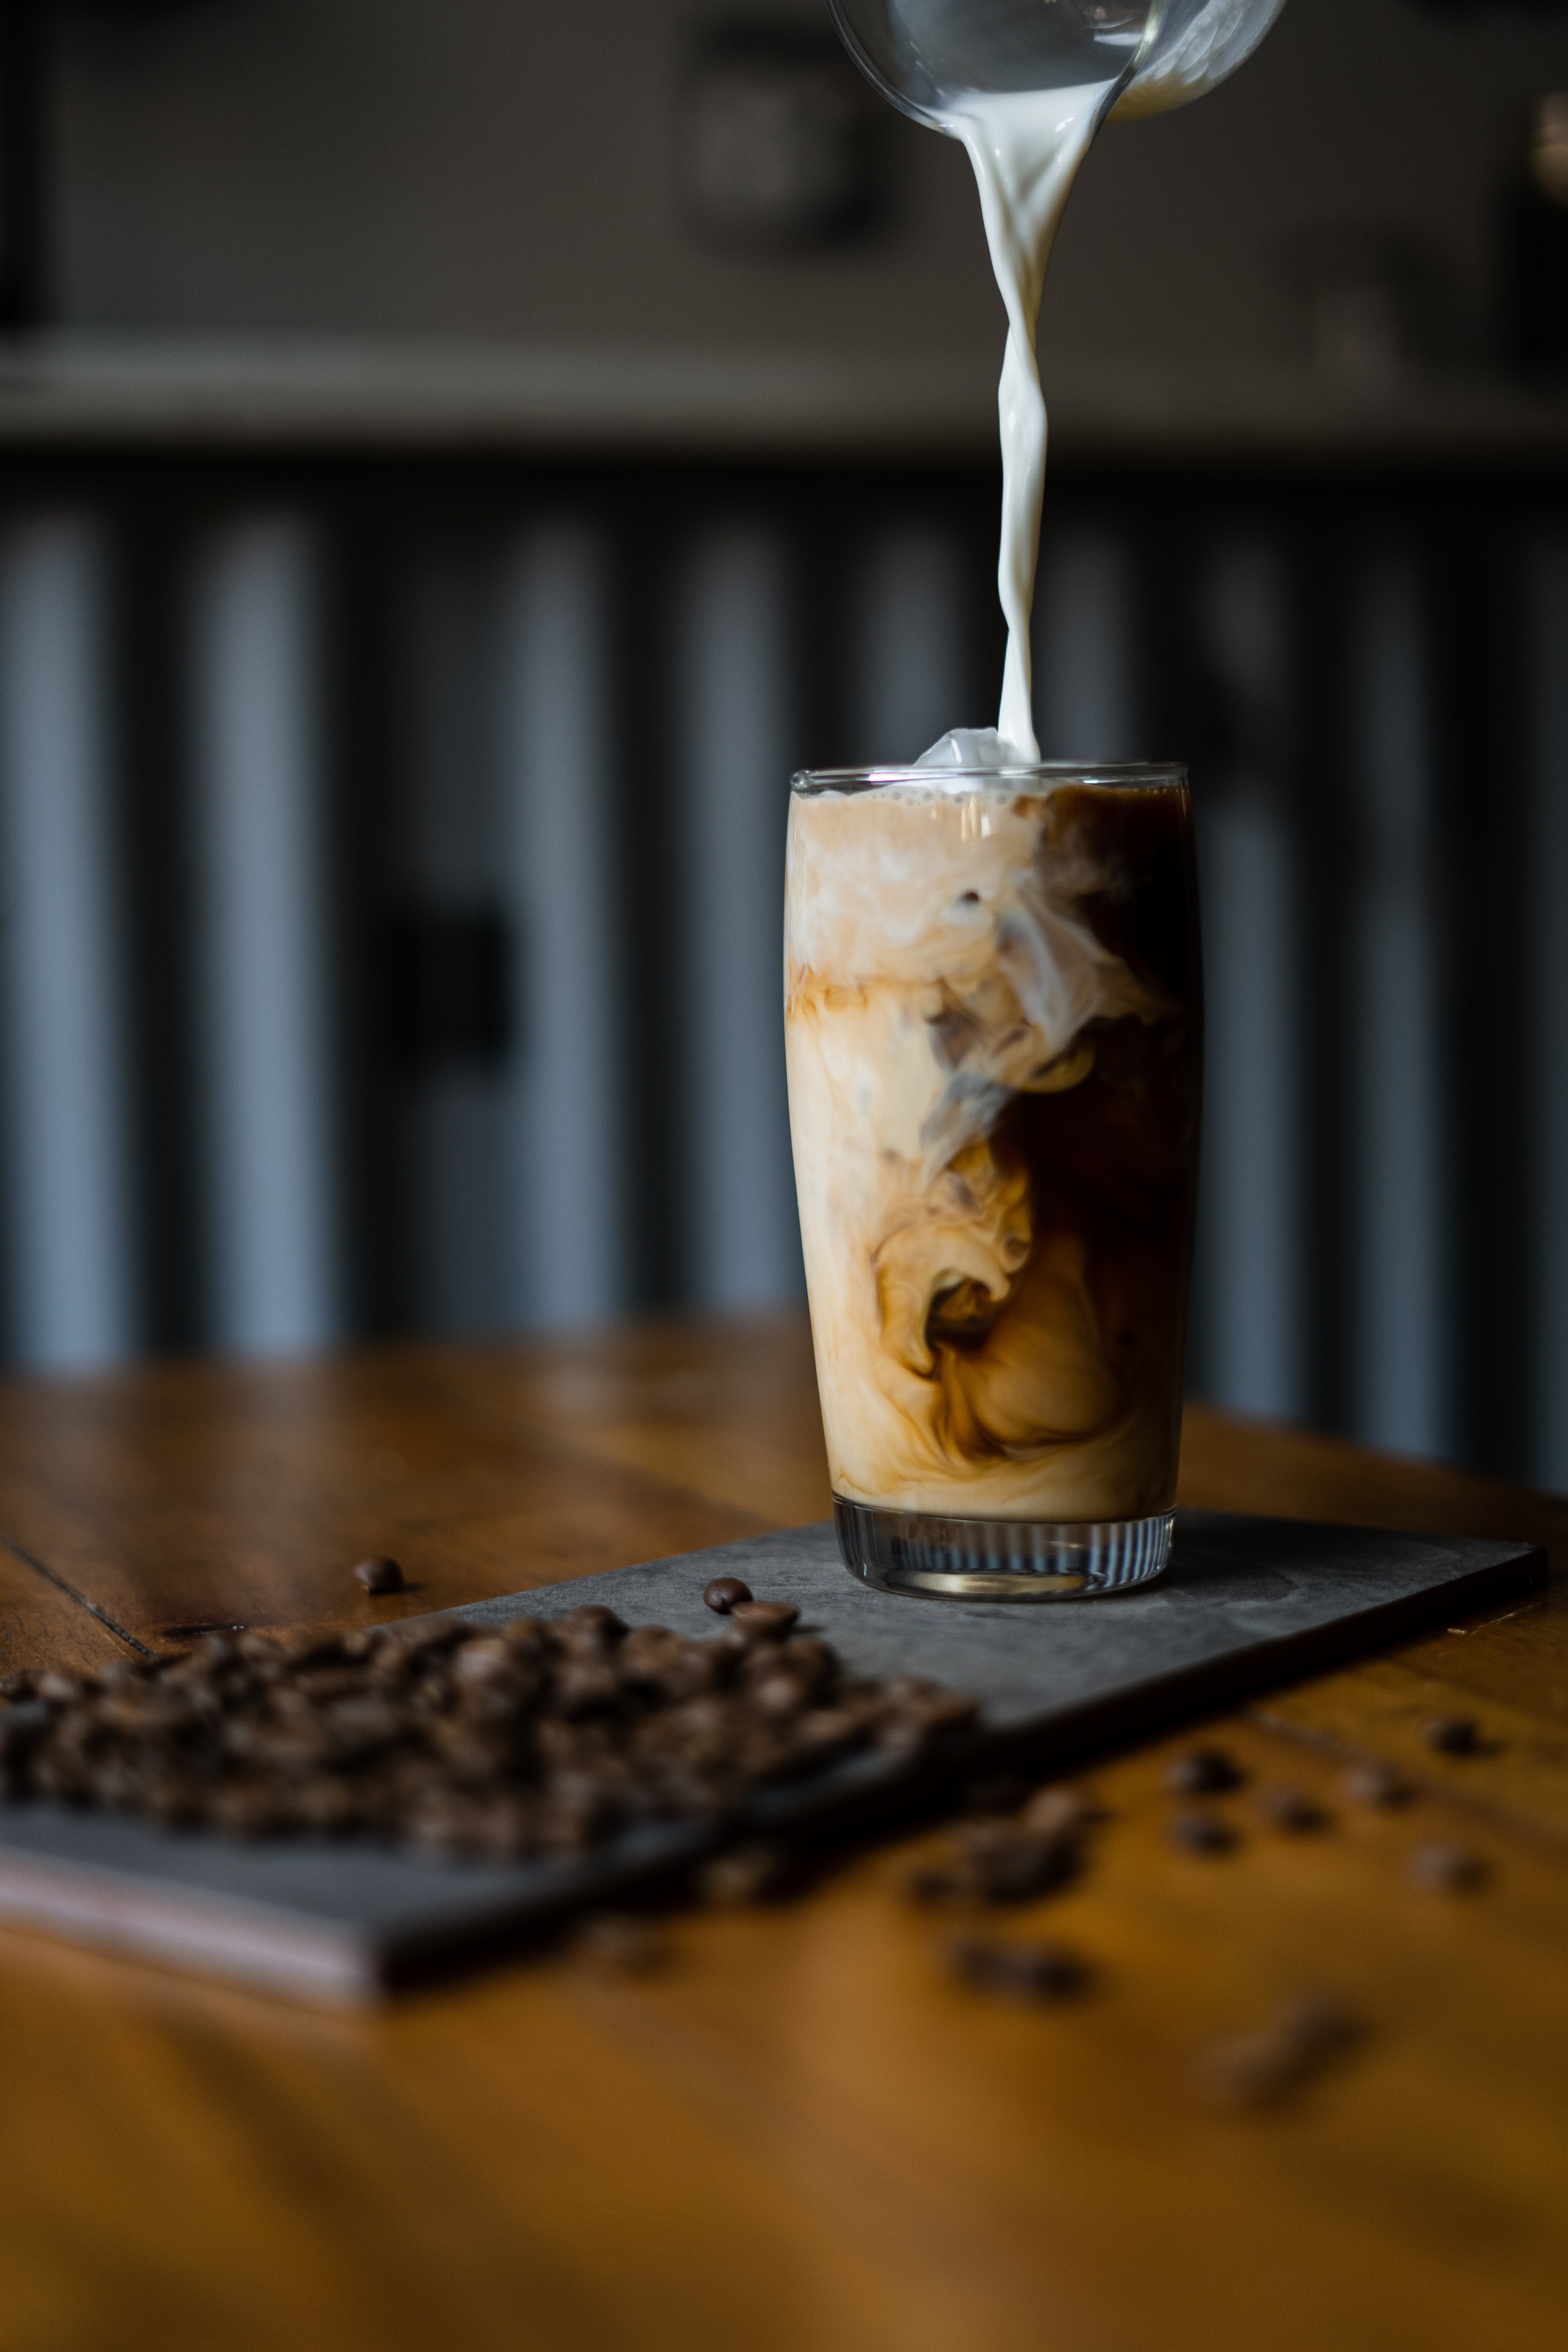 Cool Backgrounds food, coffee beans, glass Coffee